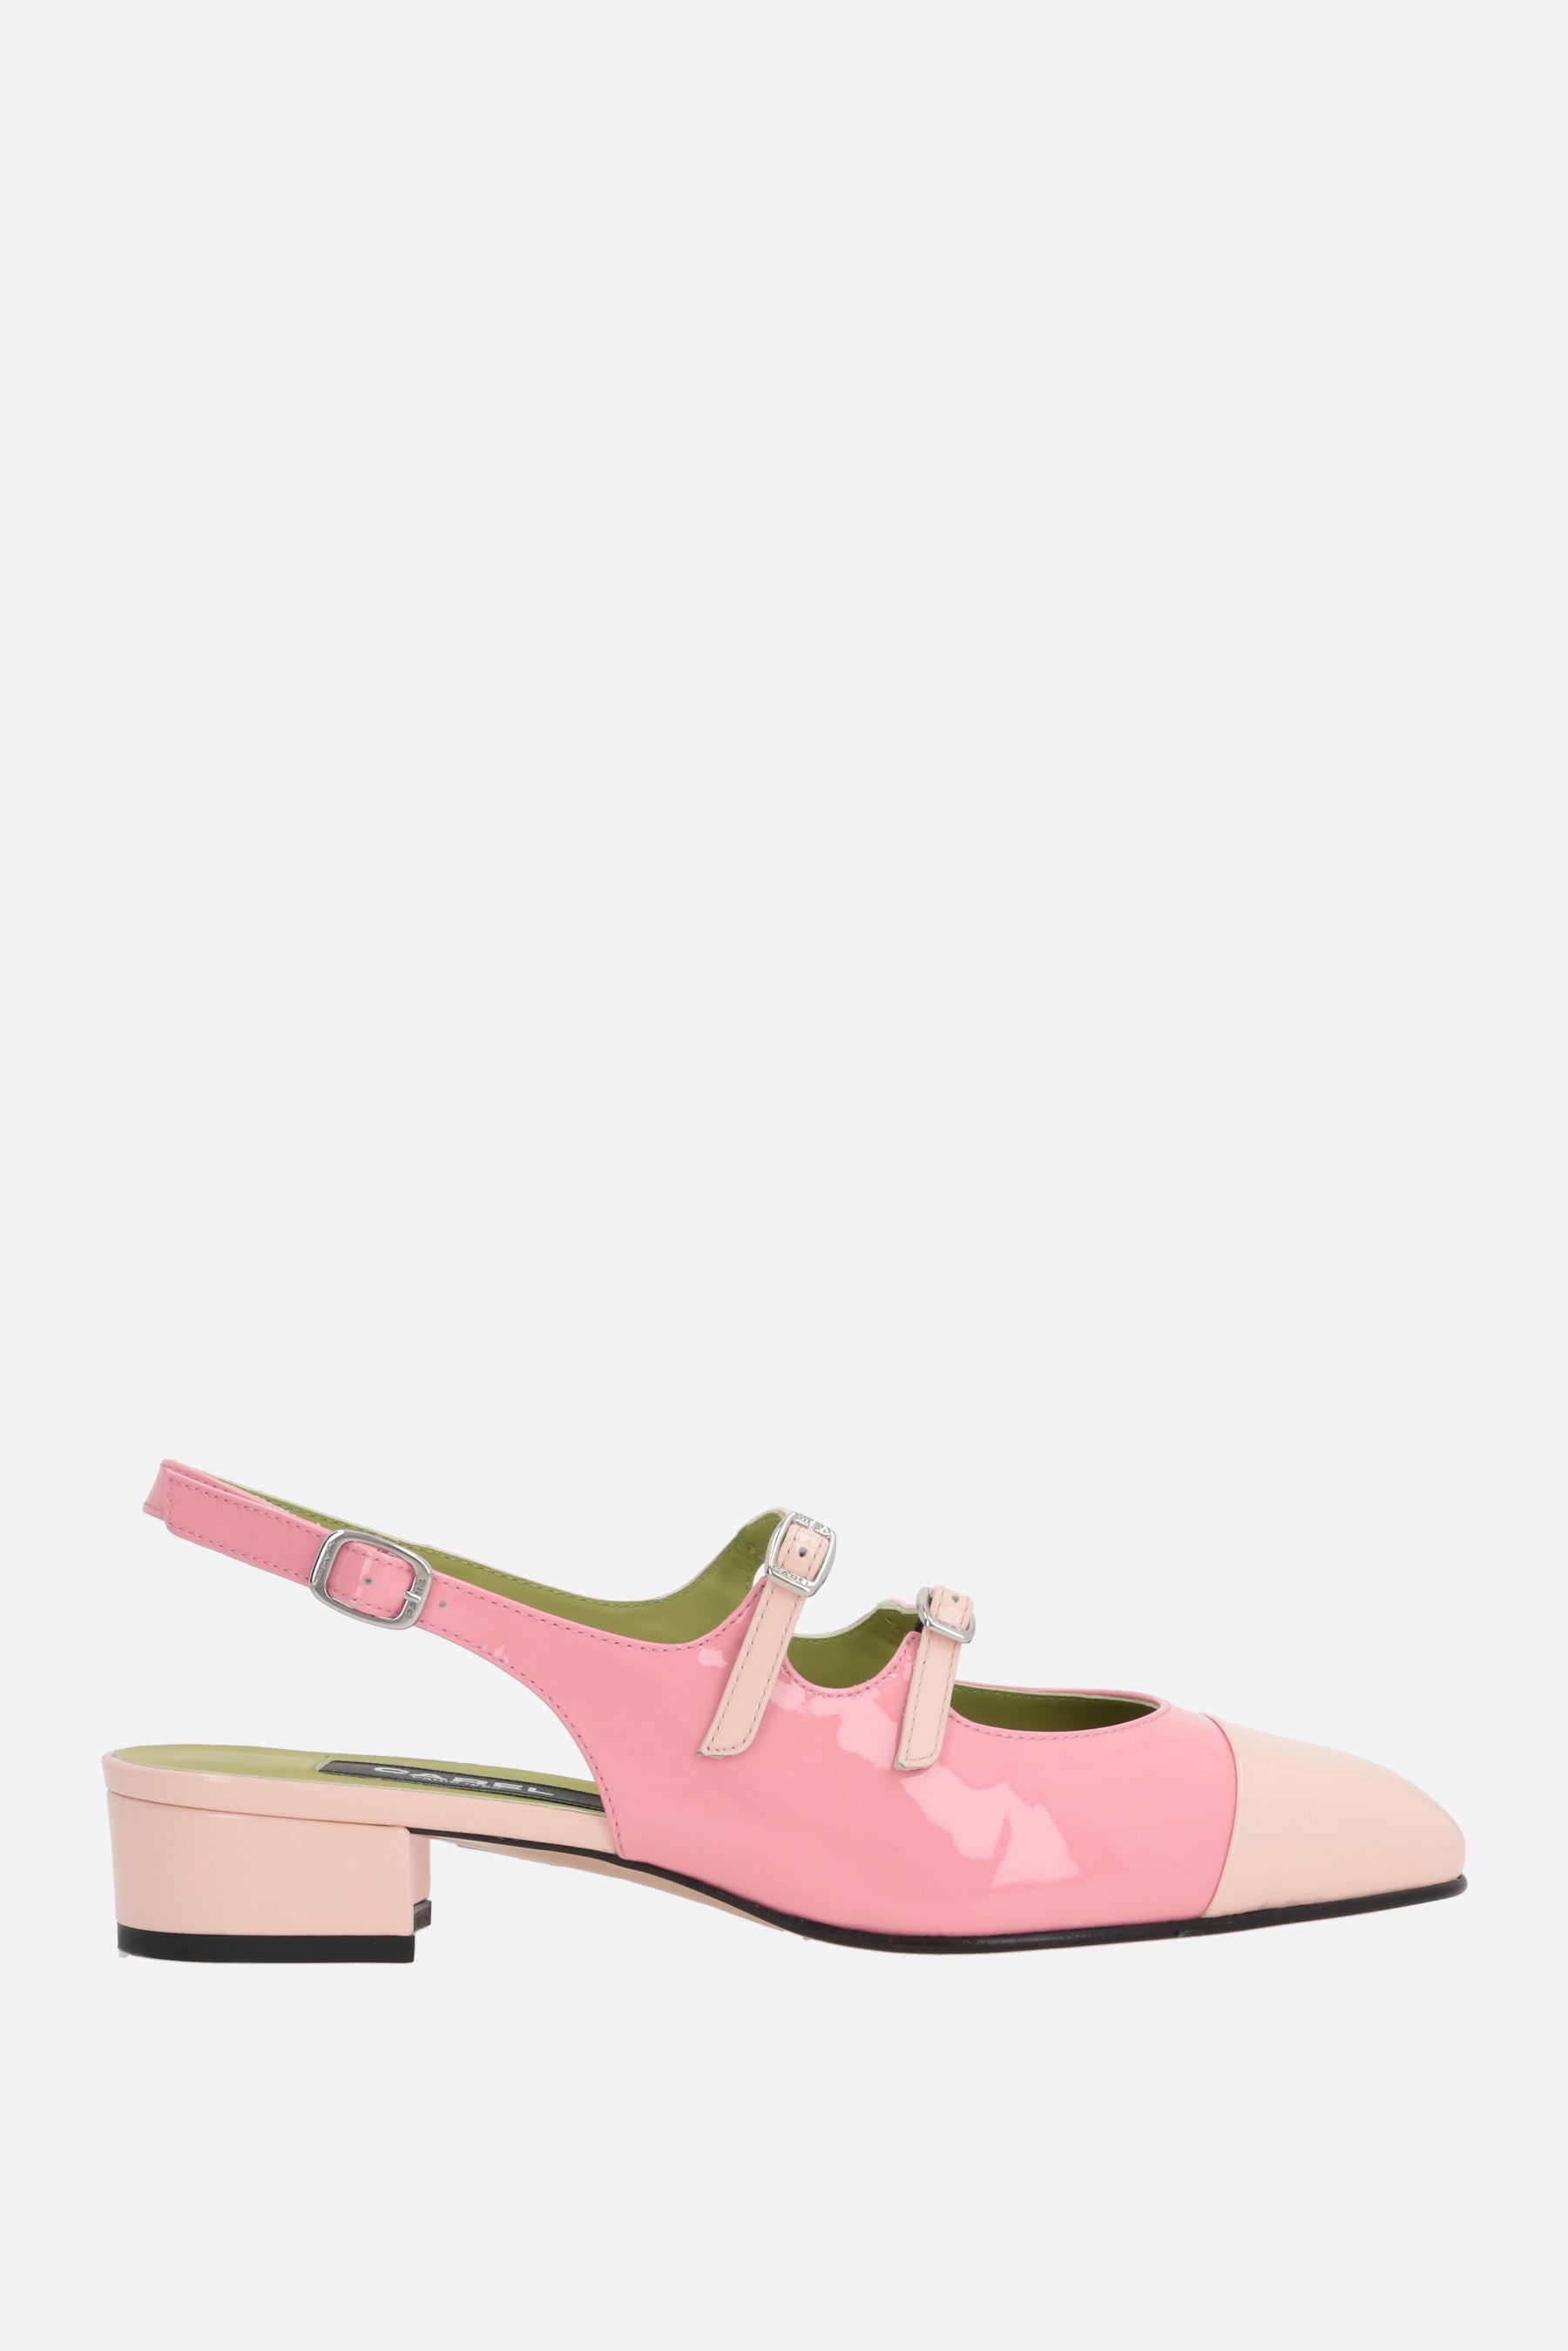 slingback mary-jane Abricot in vernice bicolore